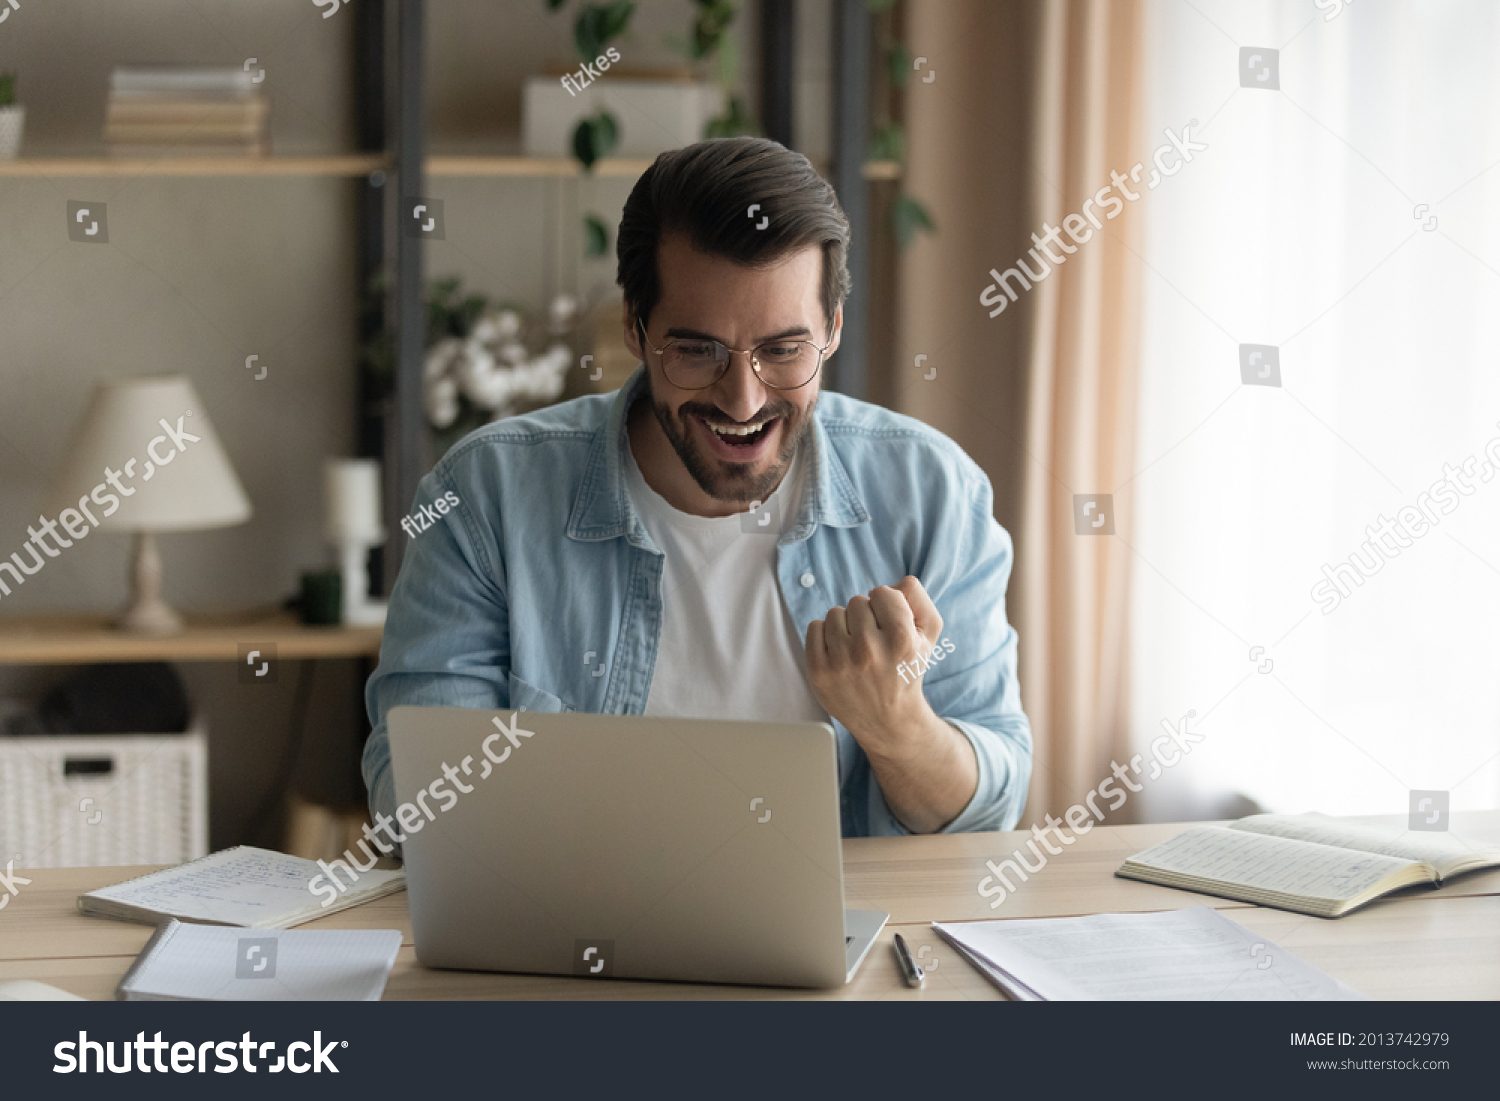 Man sit at desk read e-mail on laptop makes yes gesture feels happy. Male entrepreneur get great business news, celebrate career growth, advance. Achievement, win, moment of auction victory concept #2013742979